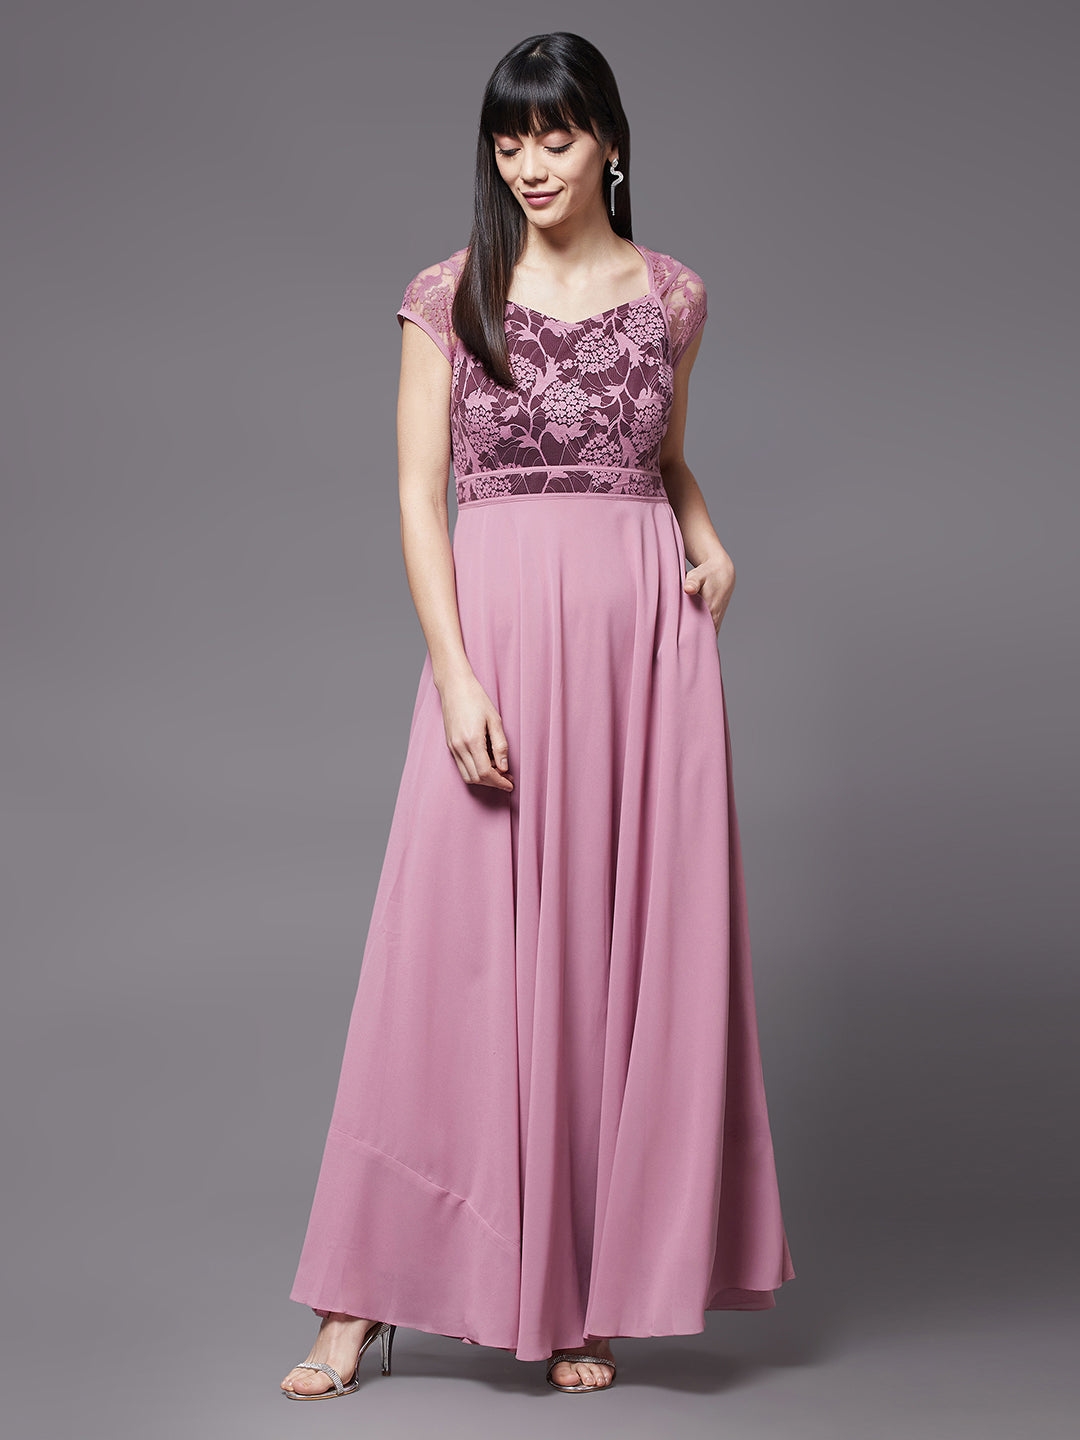 MISS CHASE | Lavender & Wine V-Neck Cap Sleeves Floral Lace Fit & Flare Maxi Dress